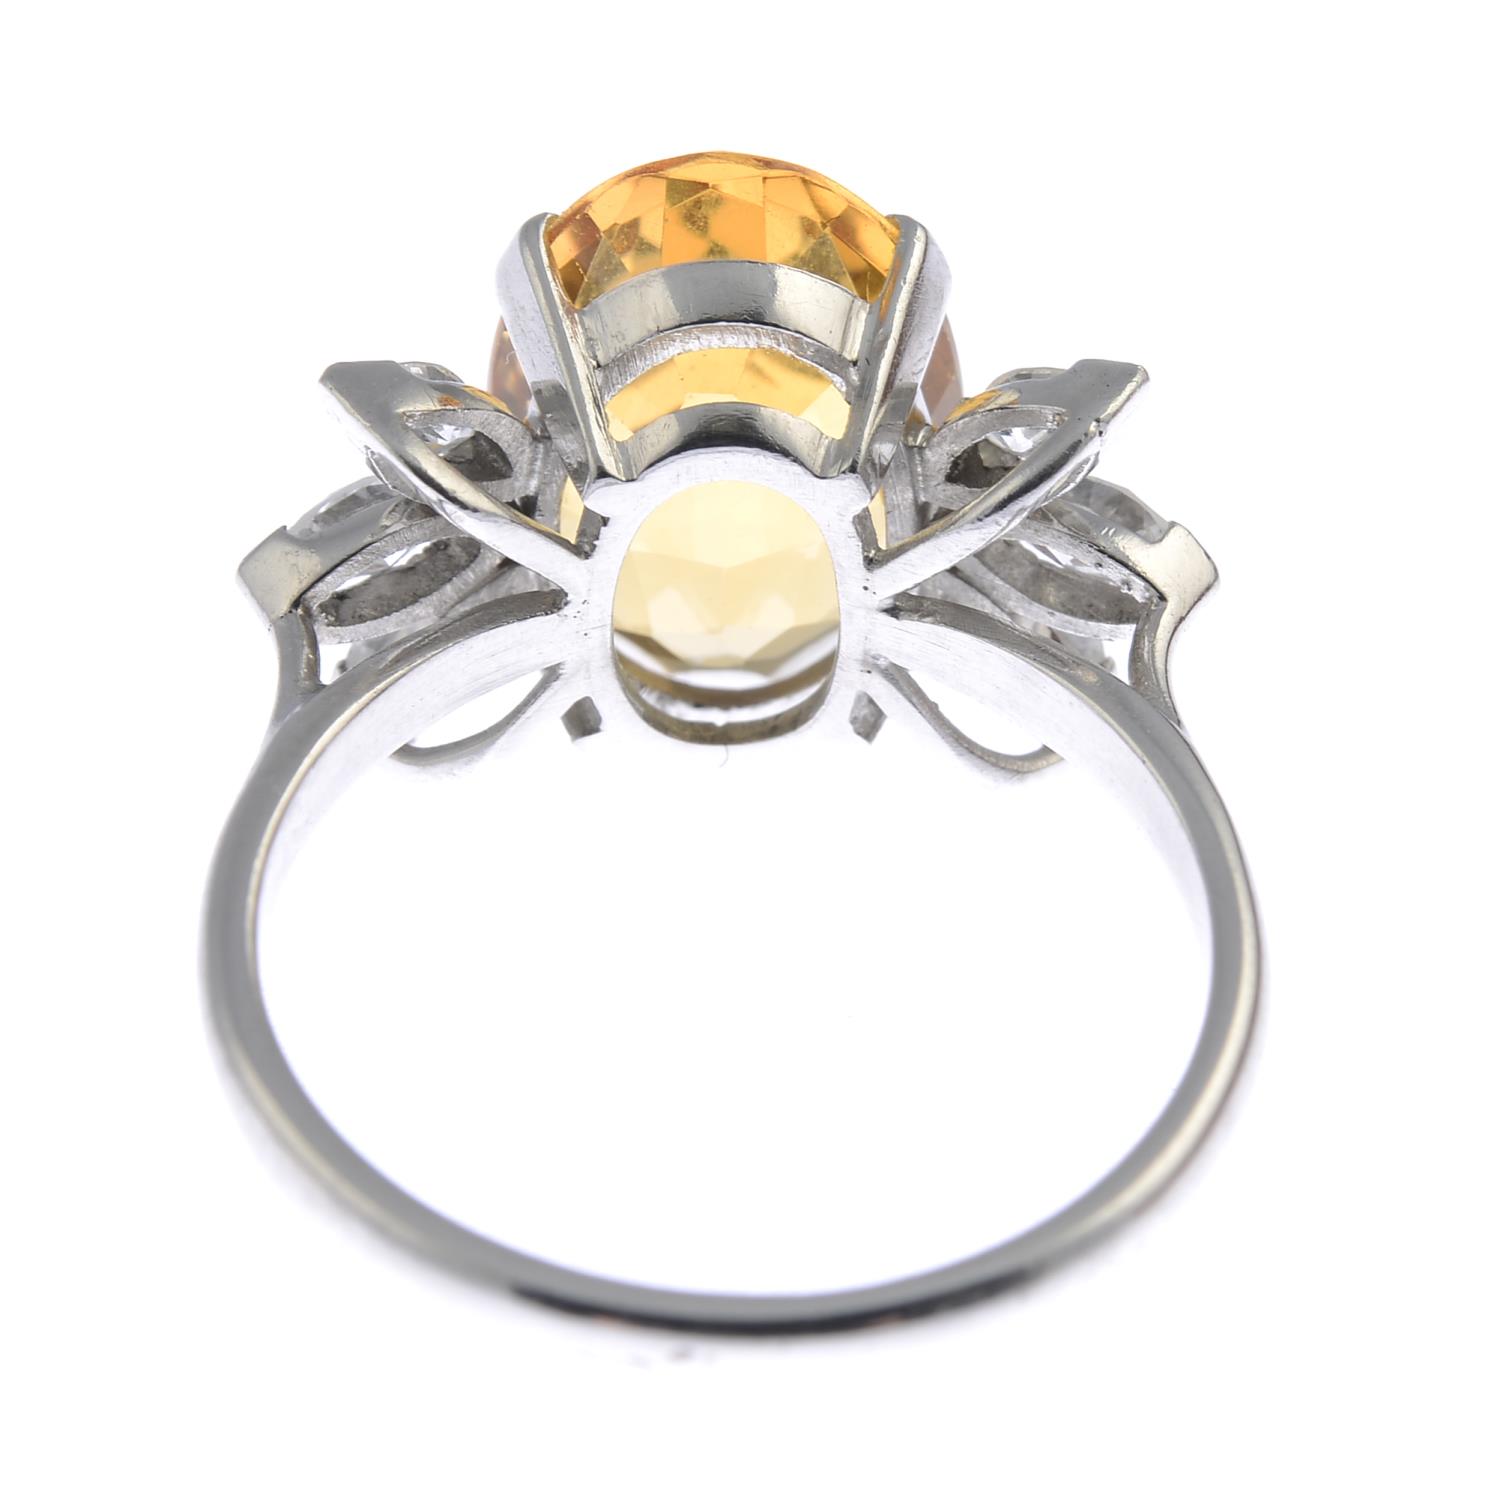 A topaz and diamond cocktail ring. - Image 4 of 4